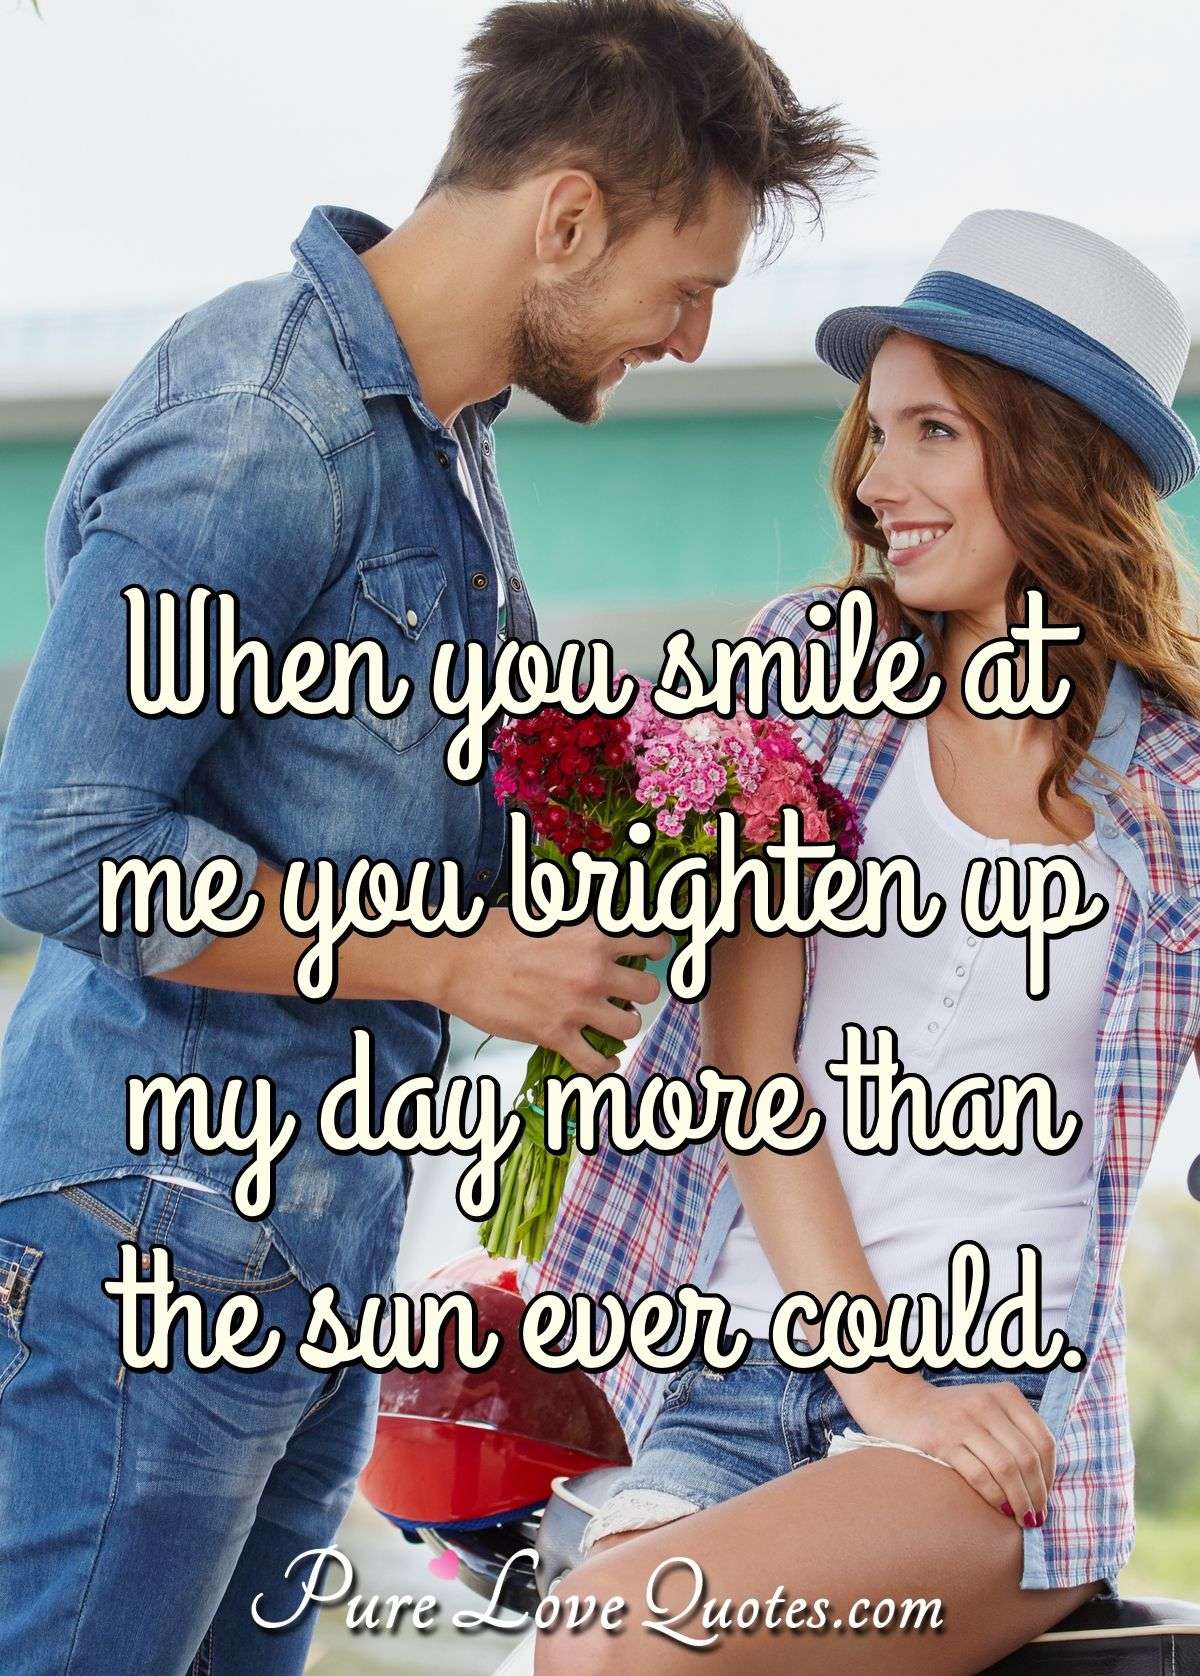 When you smile at me you brighten up my day more than the sun ever could. - PureLoveQuotes.com